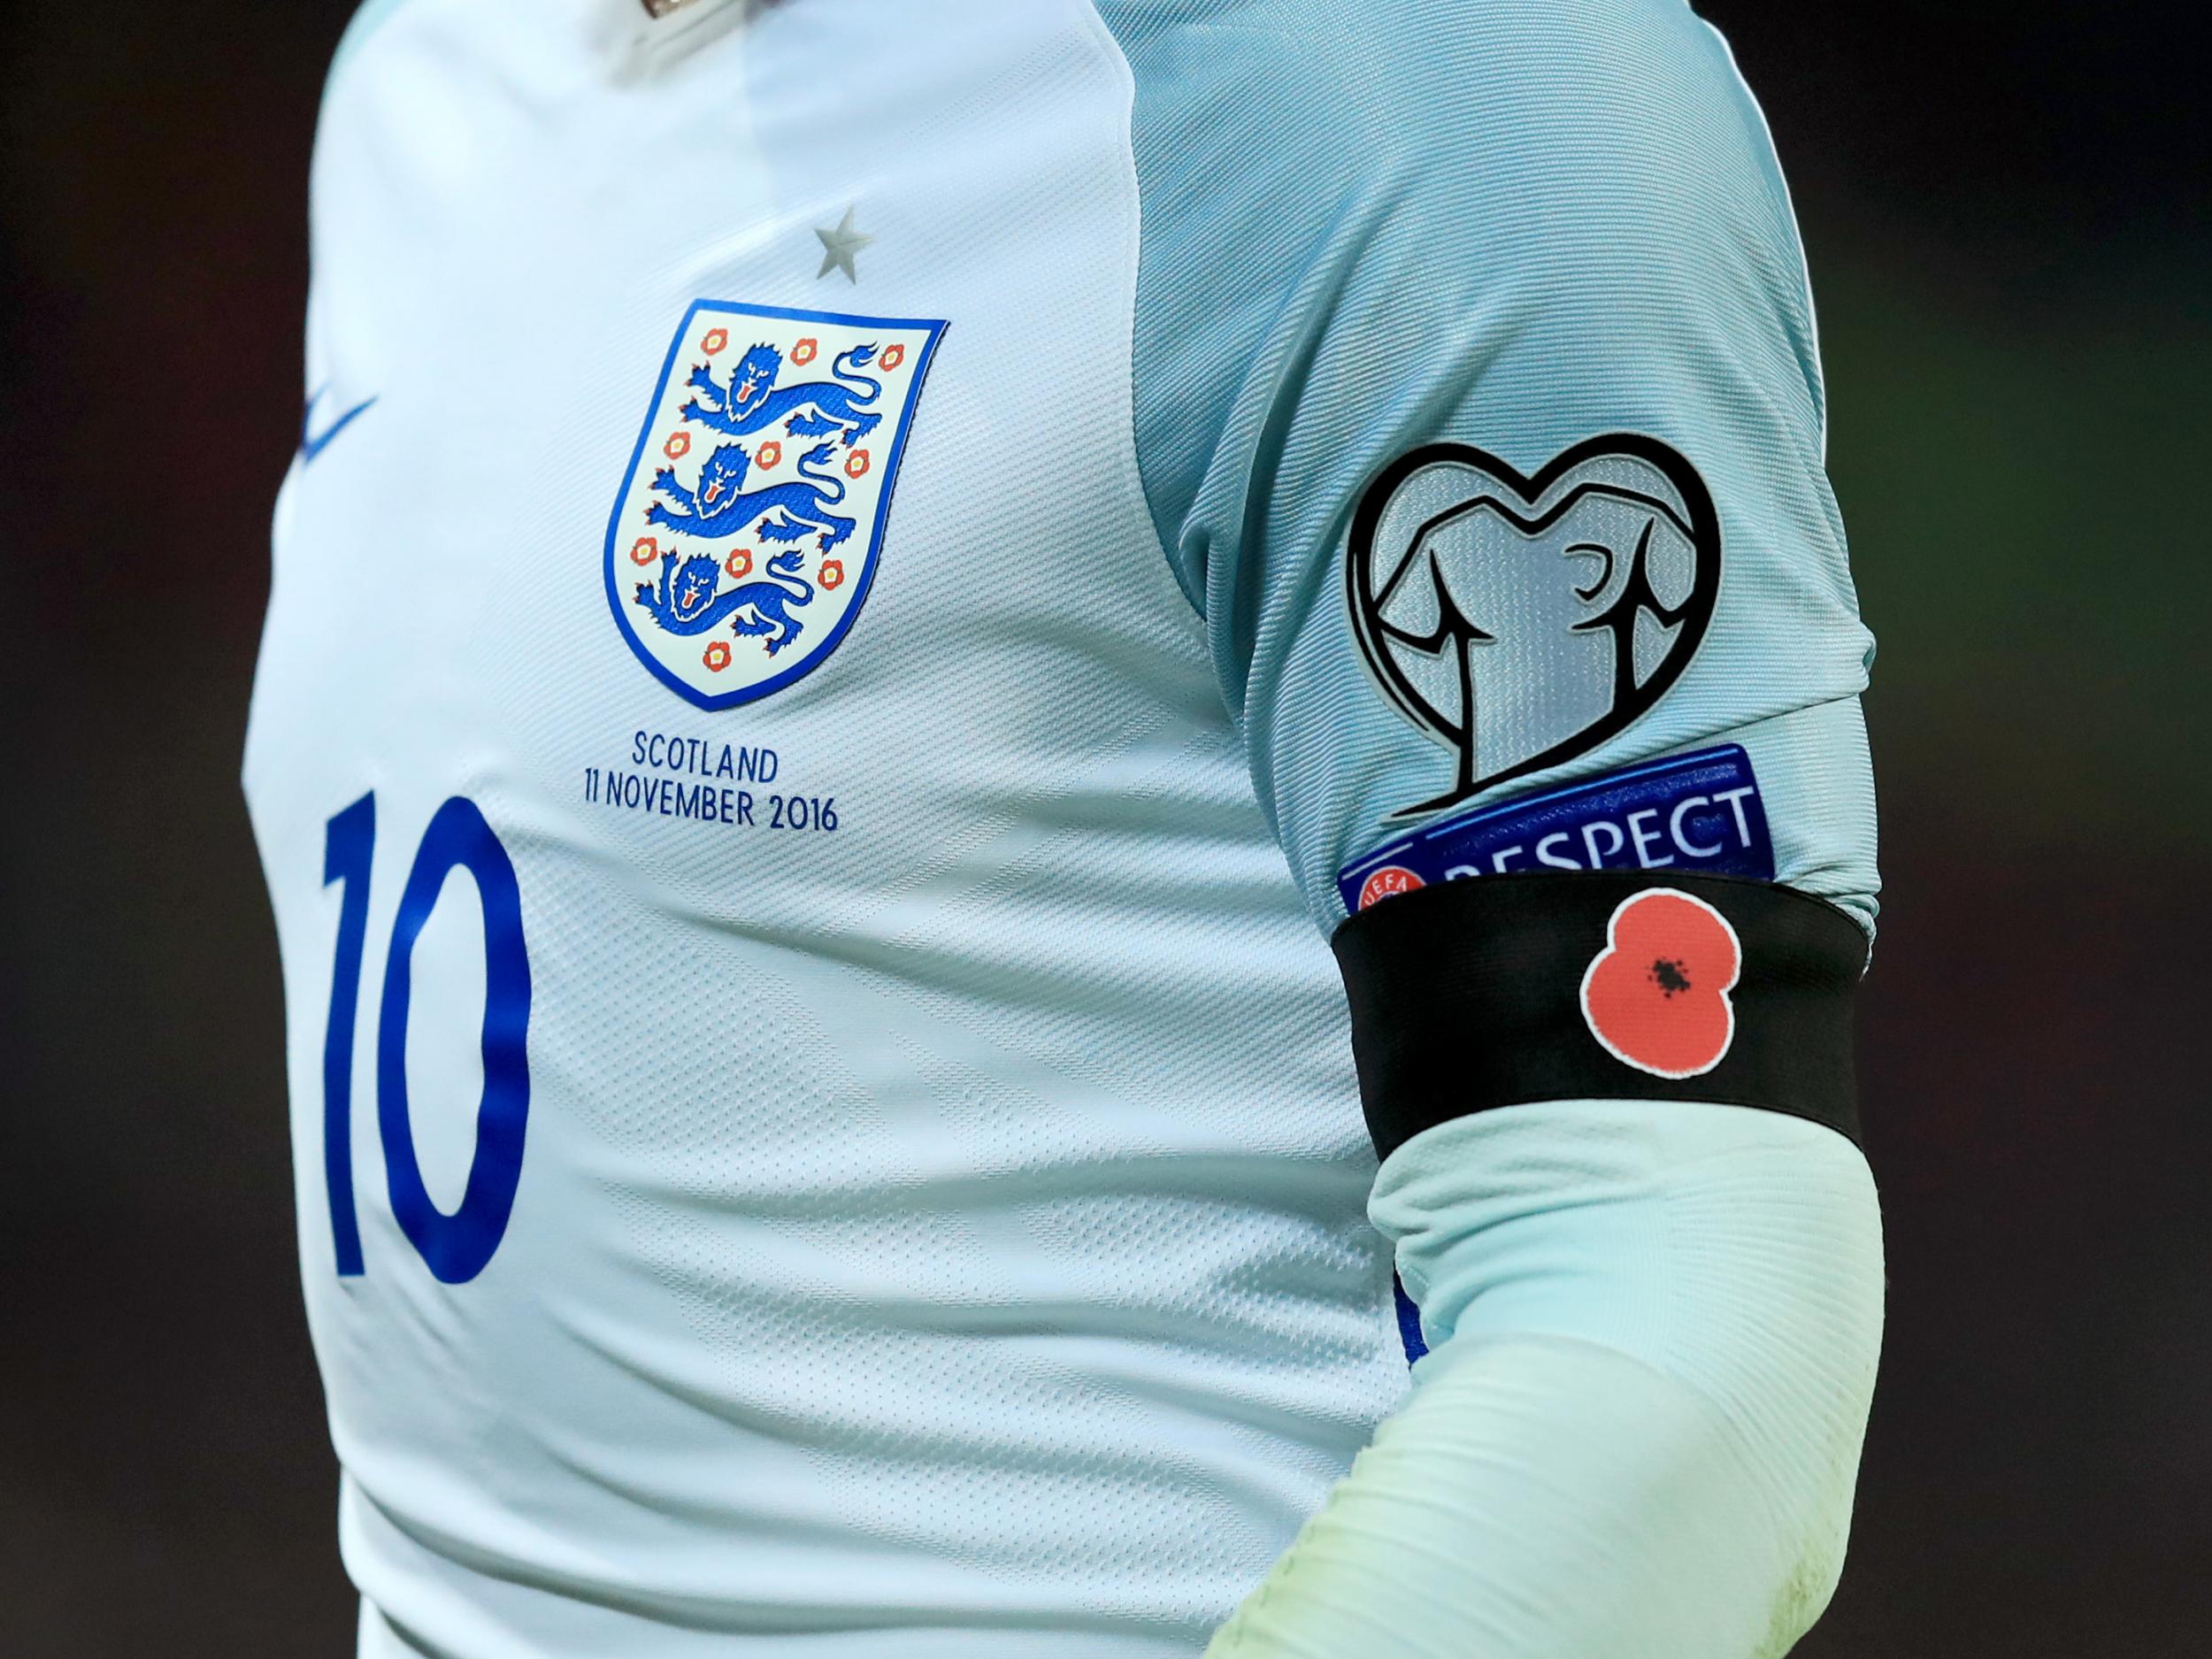 The poppy will be worn on the black armbands